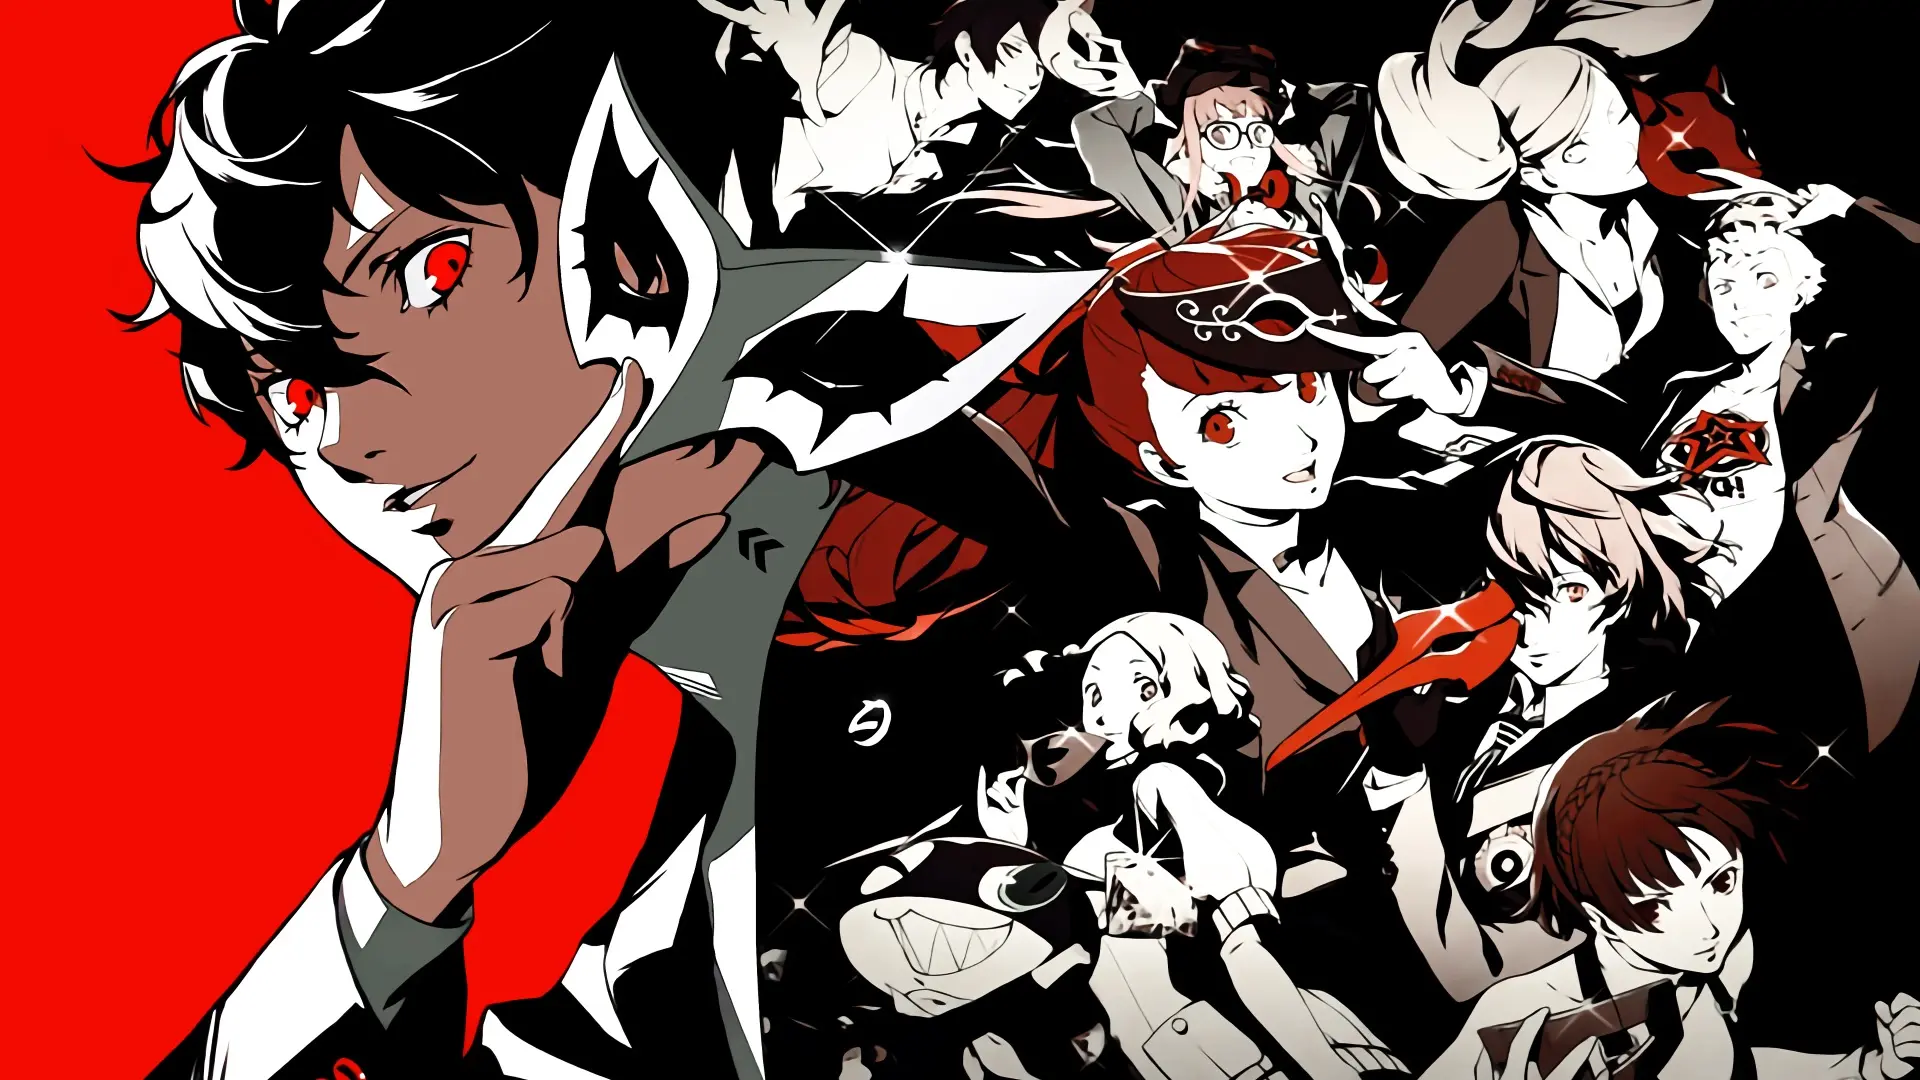 Persona 5 Royal sells over 45k Switch copies in the first week 